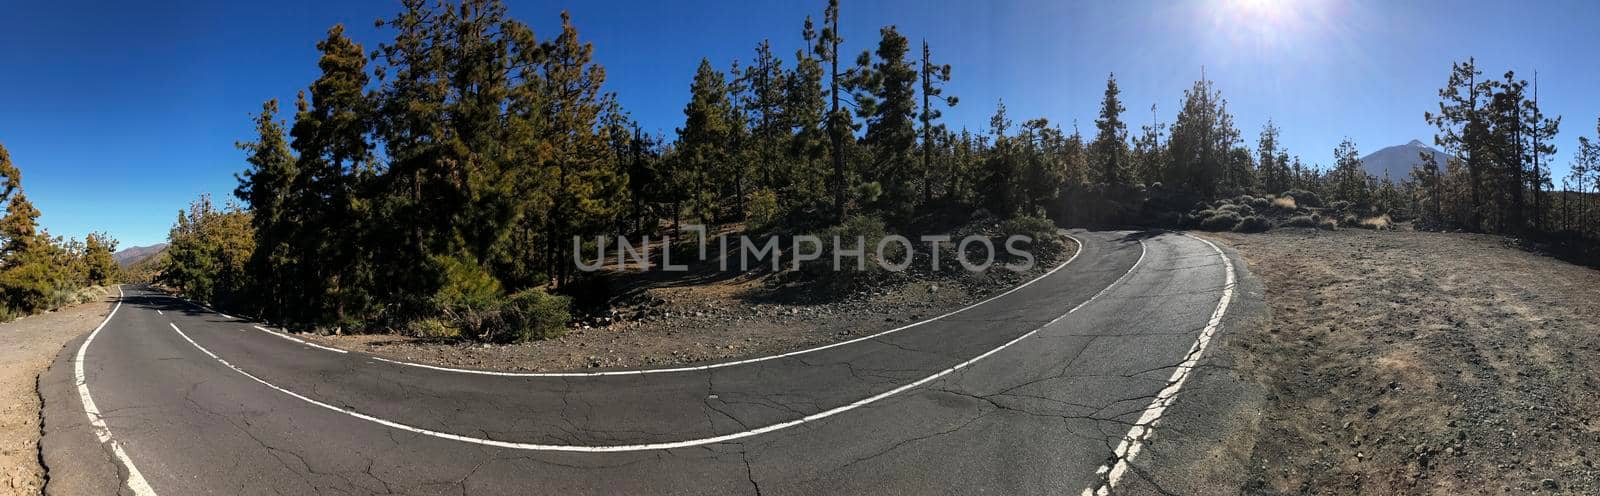 Panorama from a road through Teide National Park at Tenerife